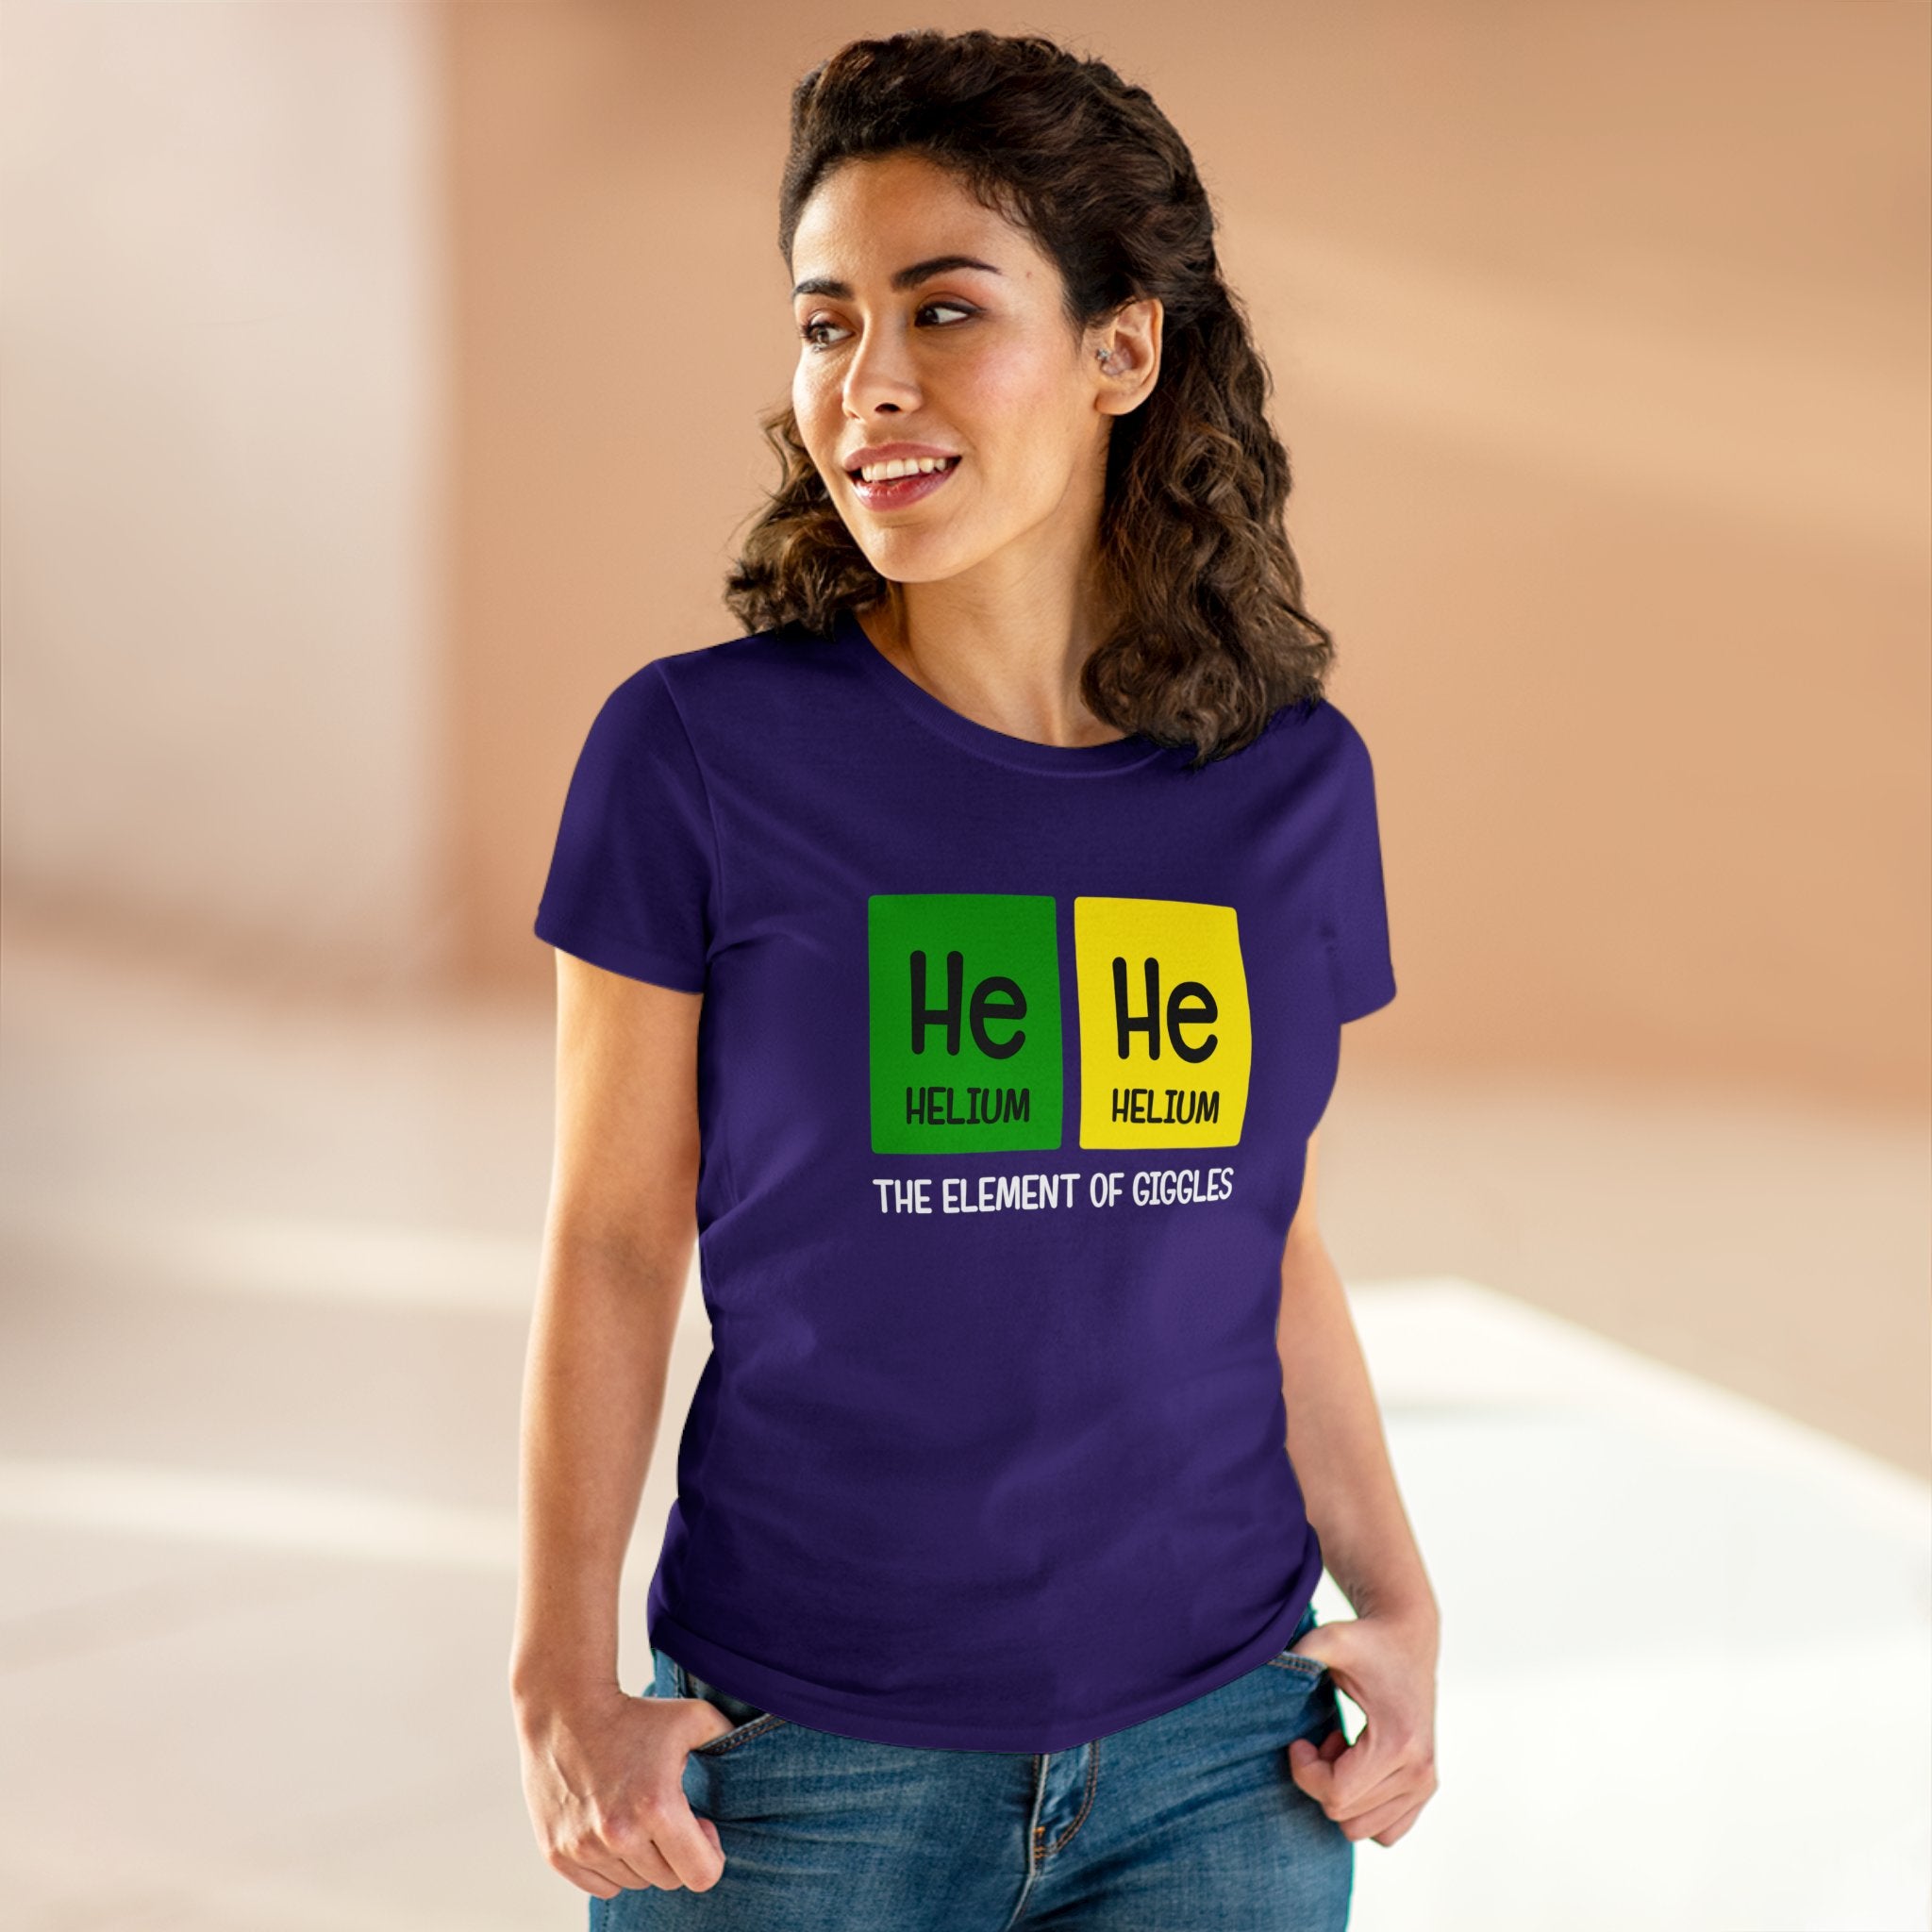 A person wearing a chic and comfy purple He-He - Women'sTee with the periodic table symbols for Helium (He) and the text "He He" and "The element of giggles," standing indoors with hands in pockets. The shirt is crafted from ethically grown US cotton.